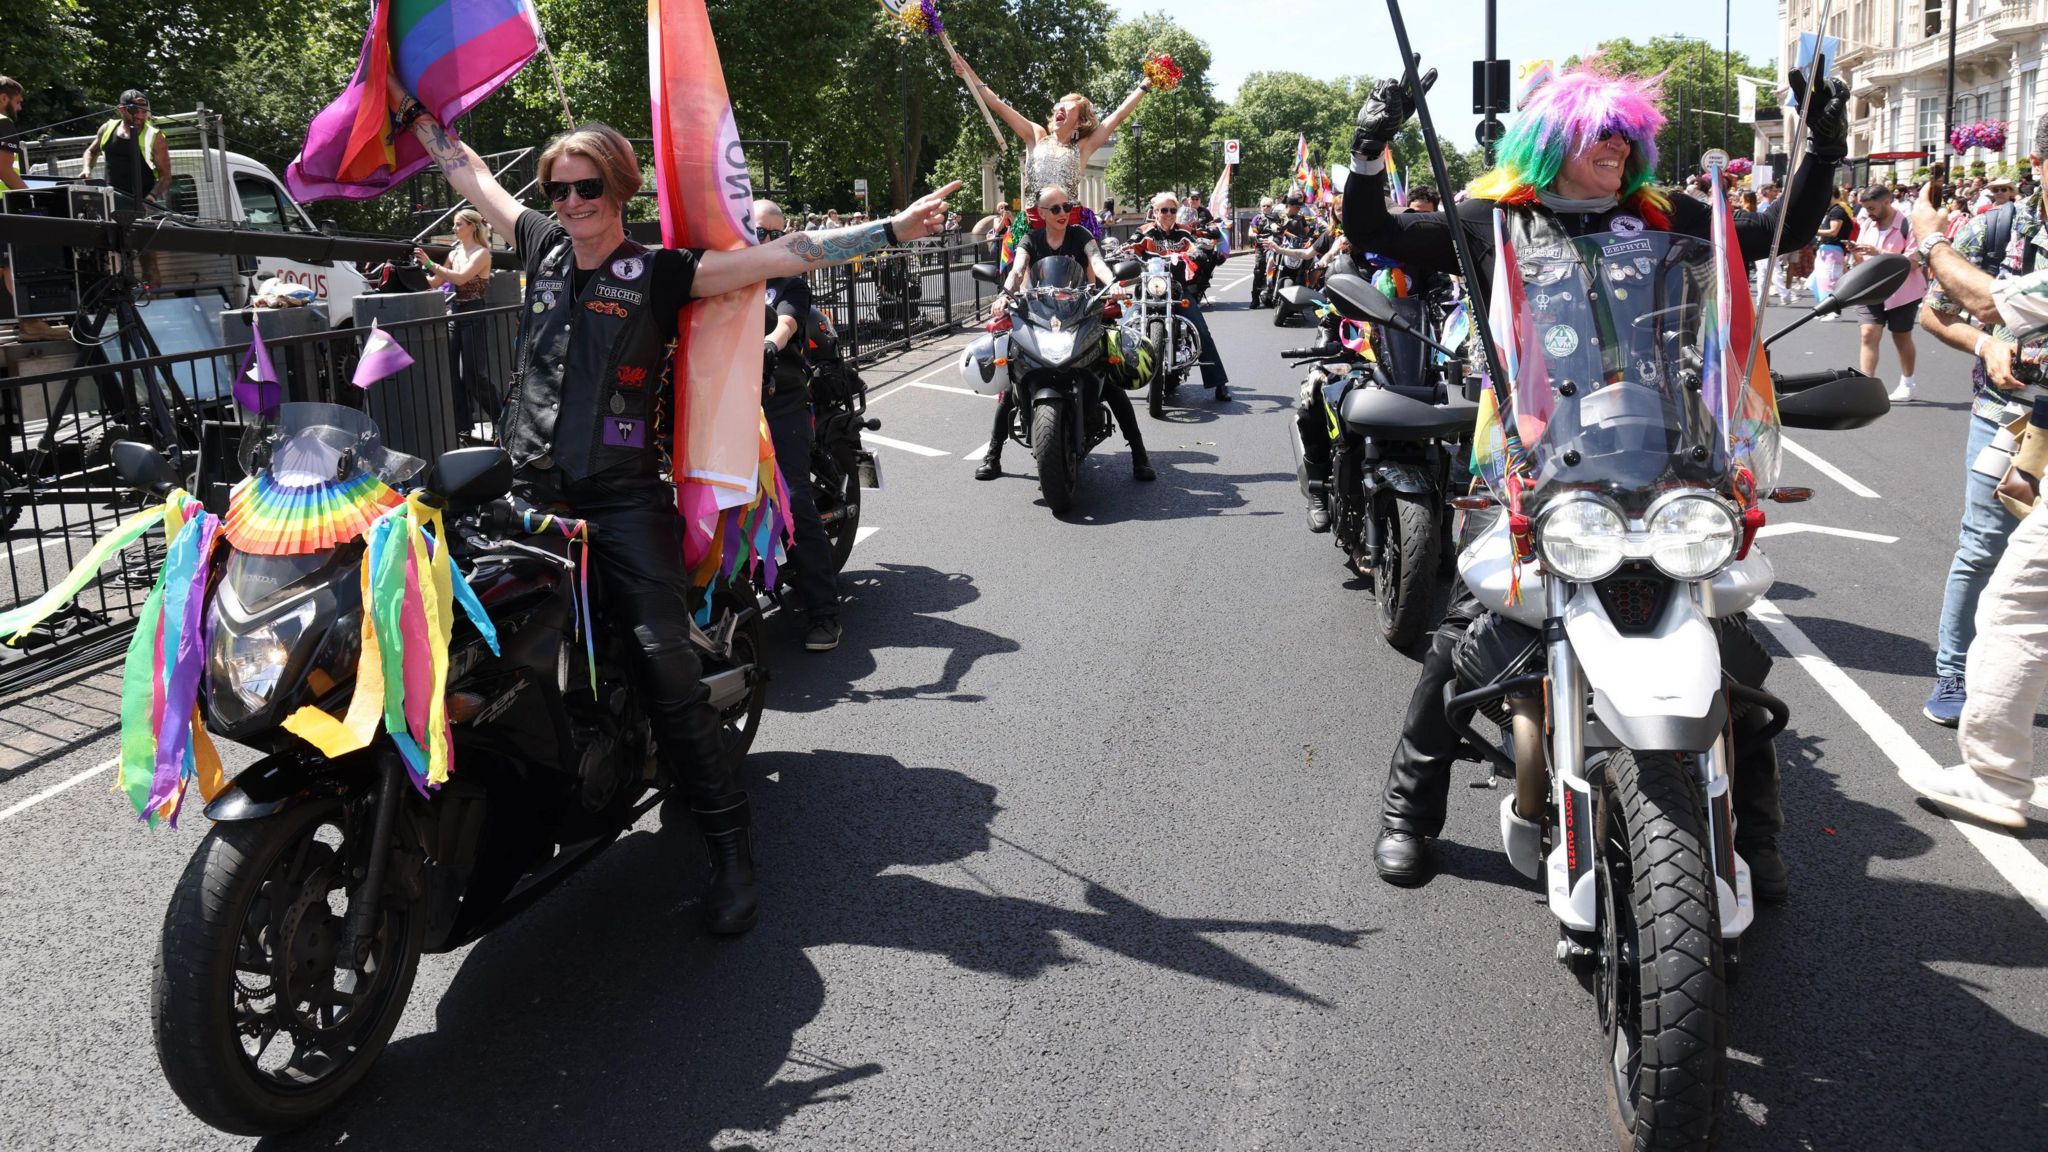 Two people sit on motorbikes decorated with ribbons and Pride flags